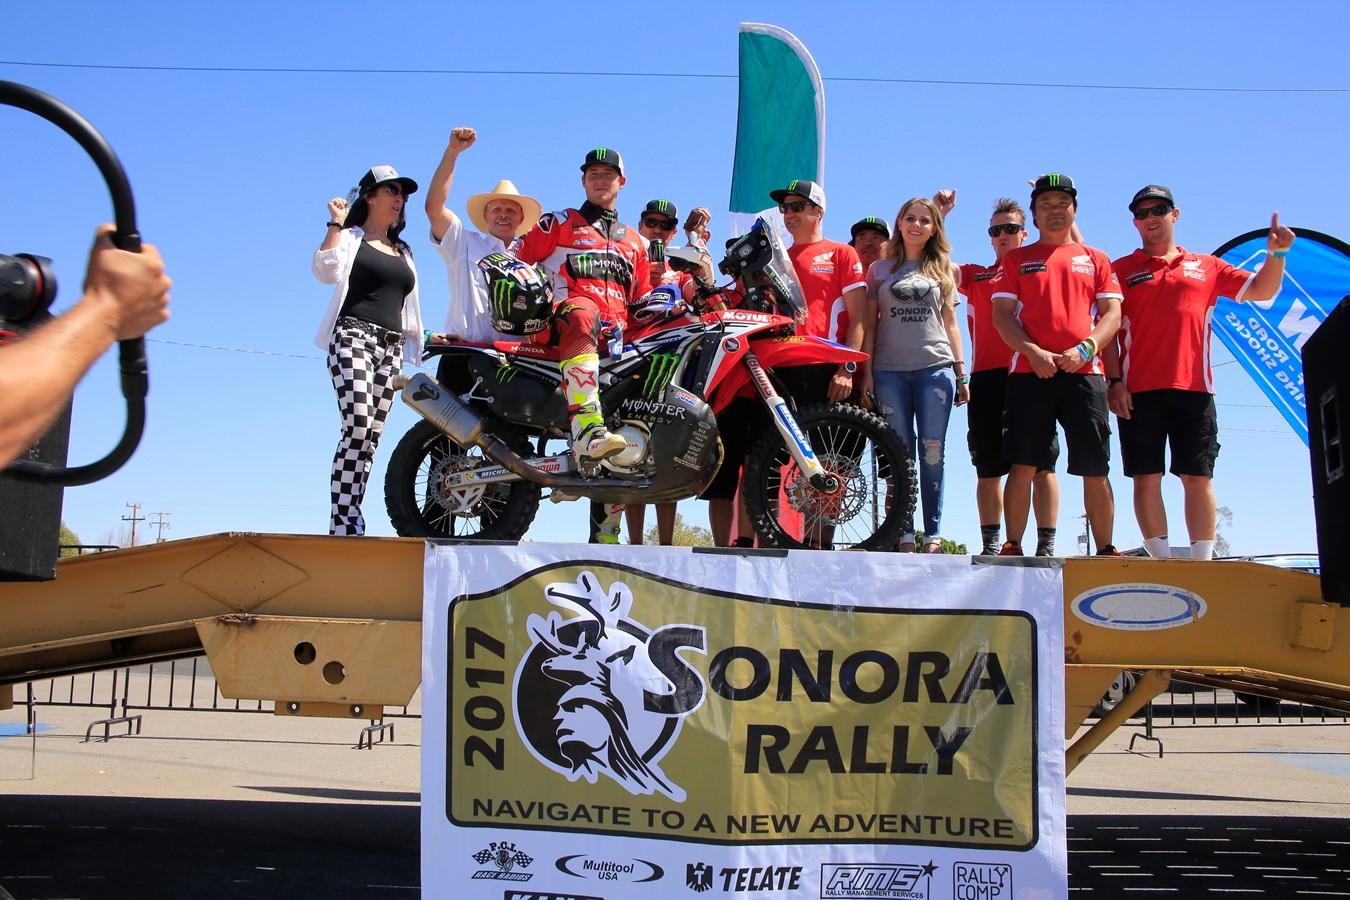 Sonora Rally 2017